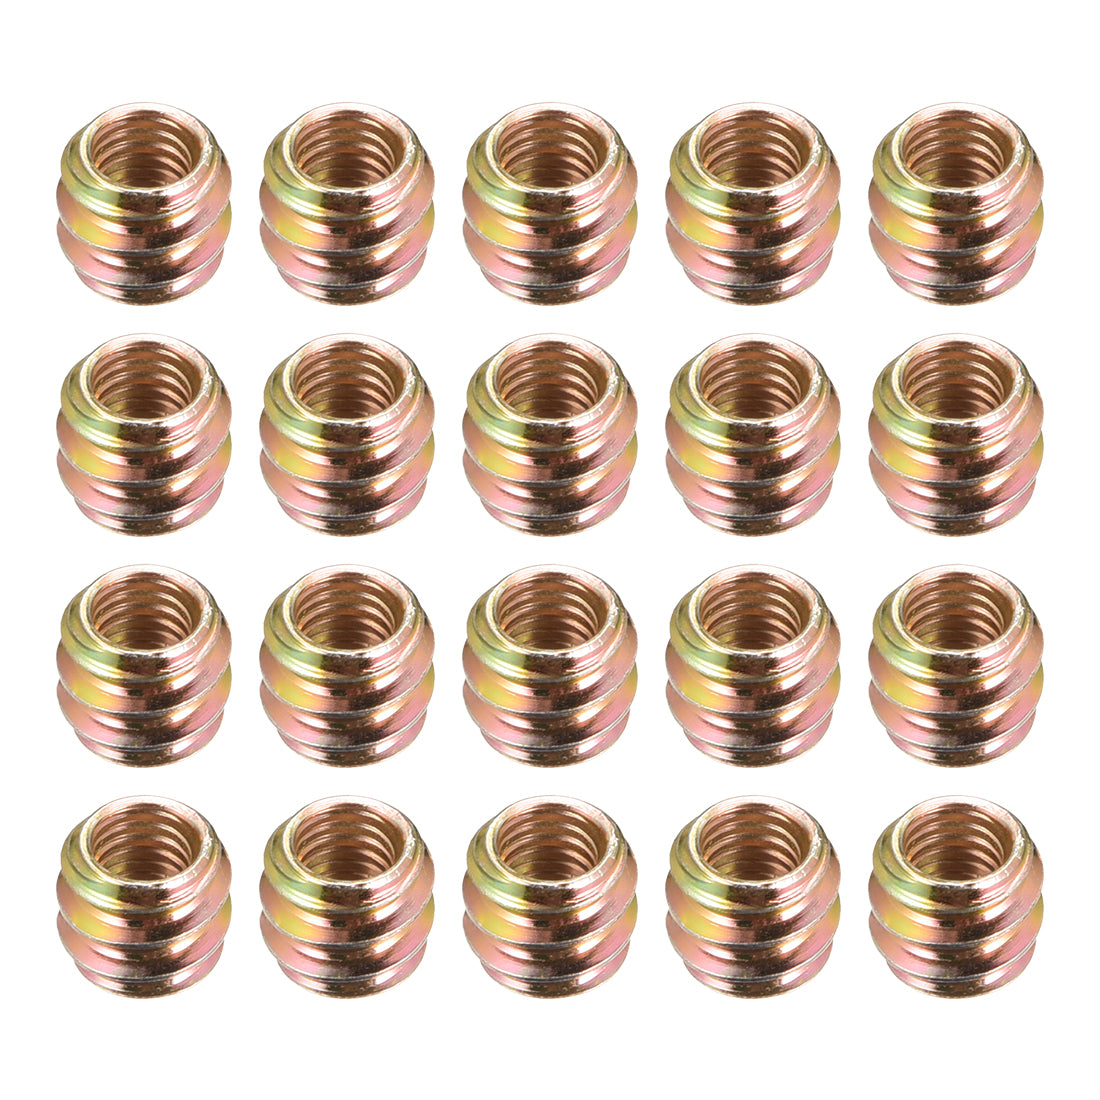 Uxcell Uxcell Furniture Threaded Insert Nuts Carbon Steel M6 Internal Thread 10mm Length 30pcs